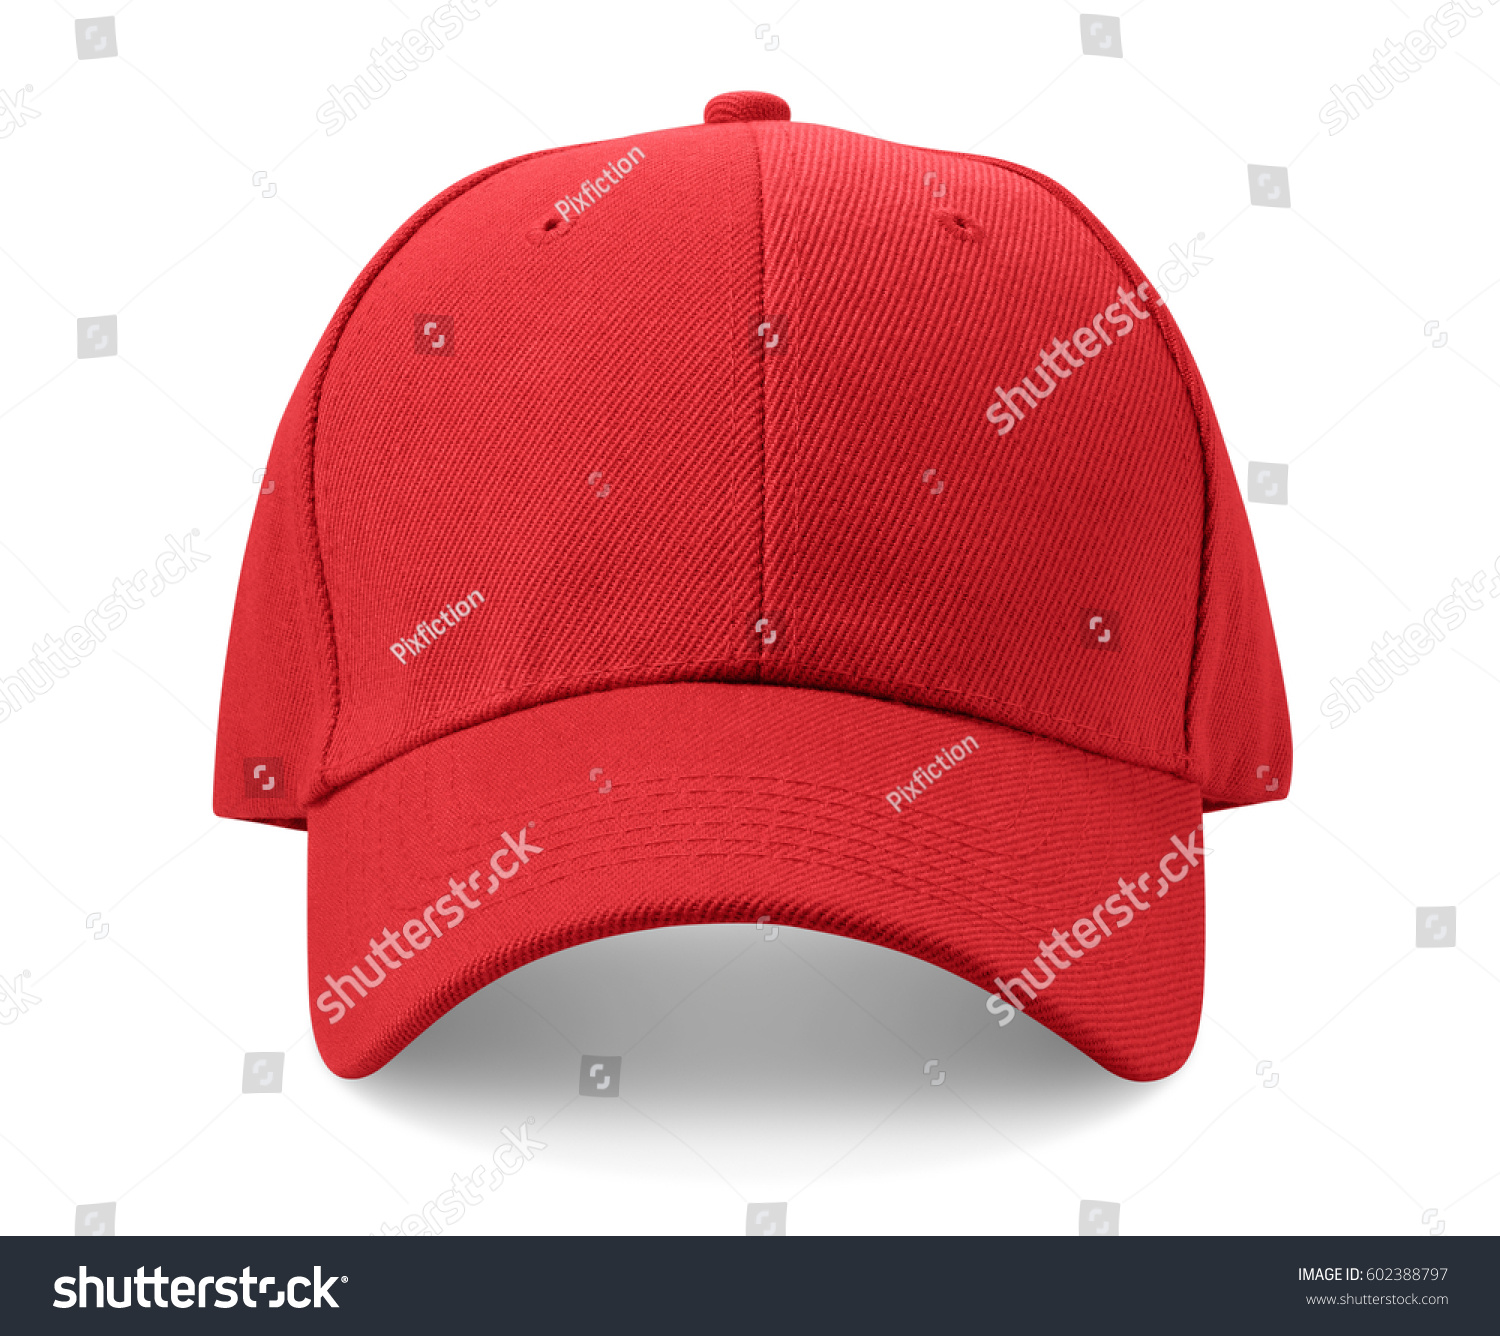 8,558 Red baseball hat Images, Stock Photos & Vectors | Shutterstock